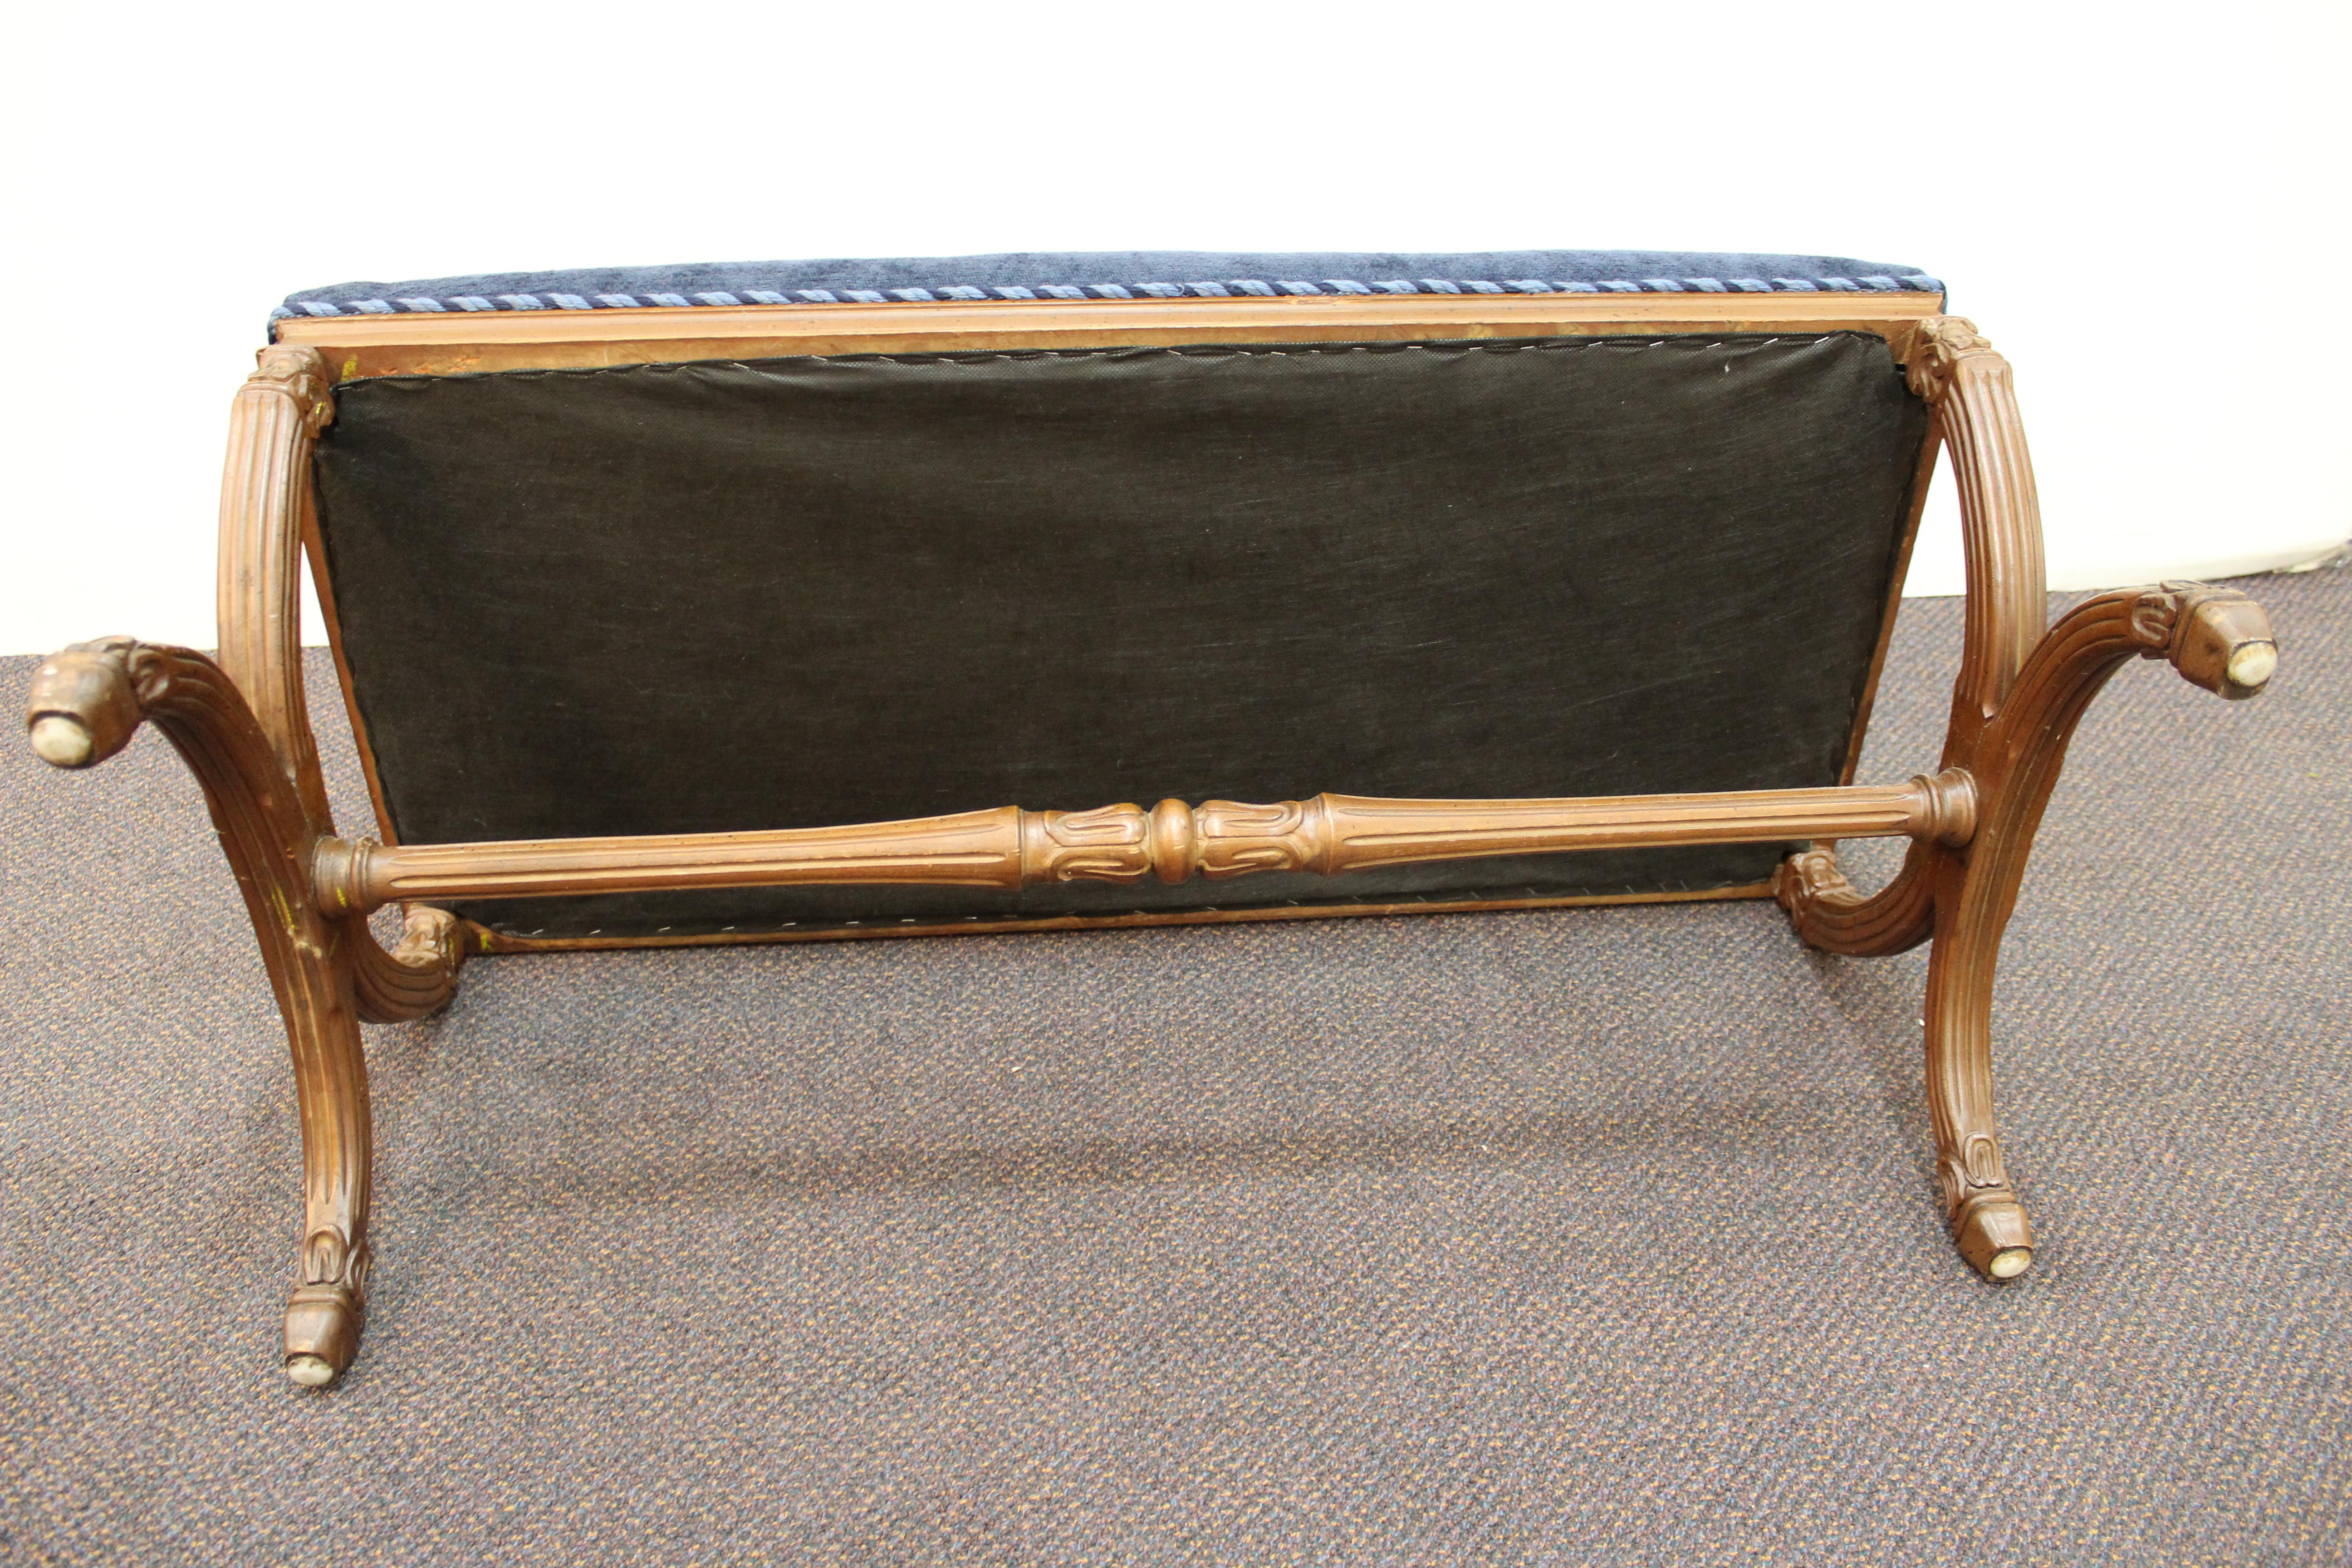 20th Century Neoclassical Style Bench with Braided Trim and Navy Chenille Upholstery